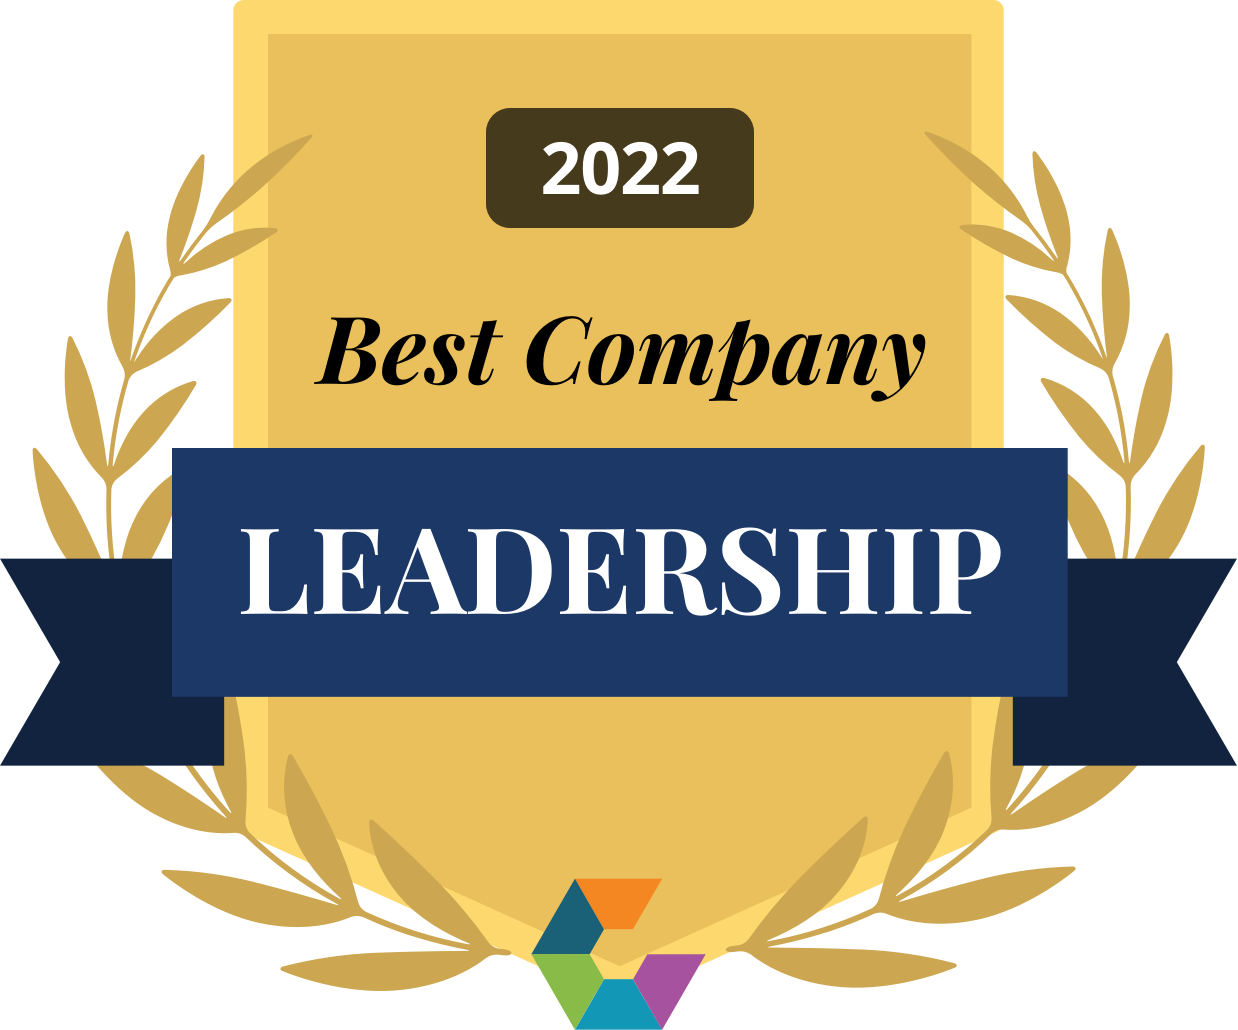 Comparably Best Company for Leadership